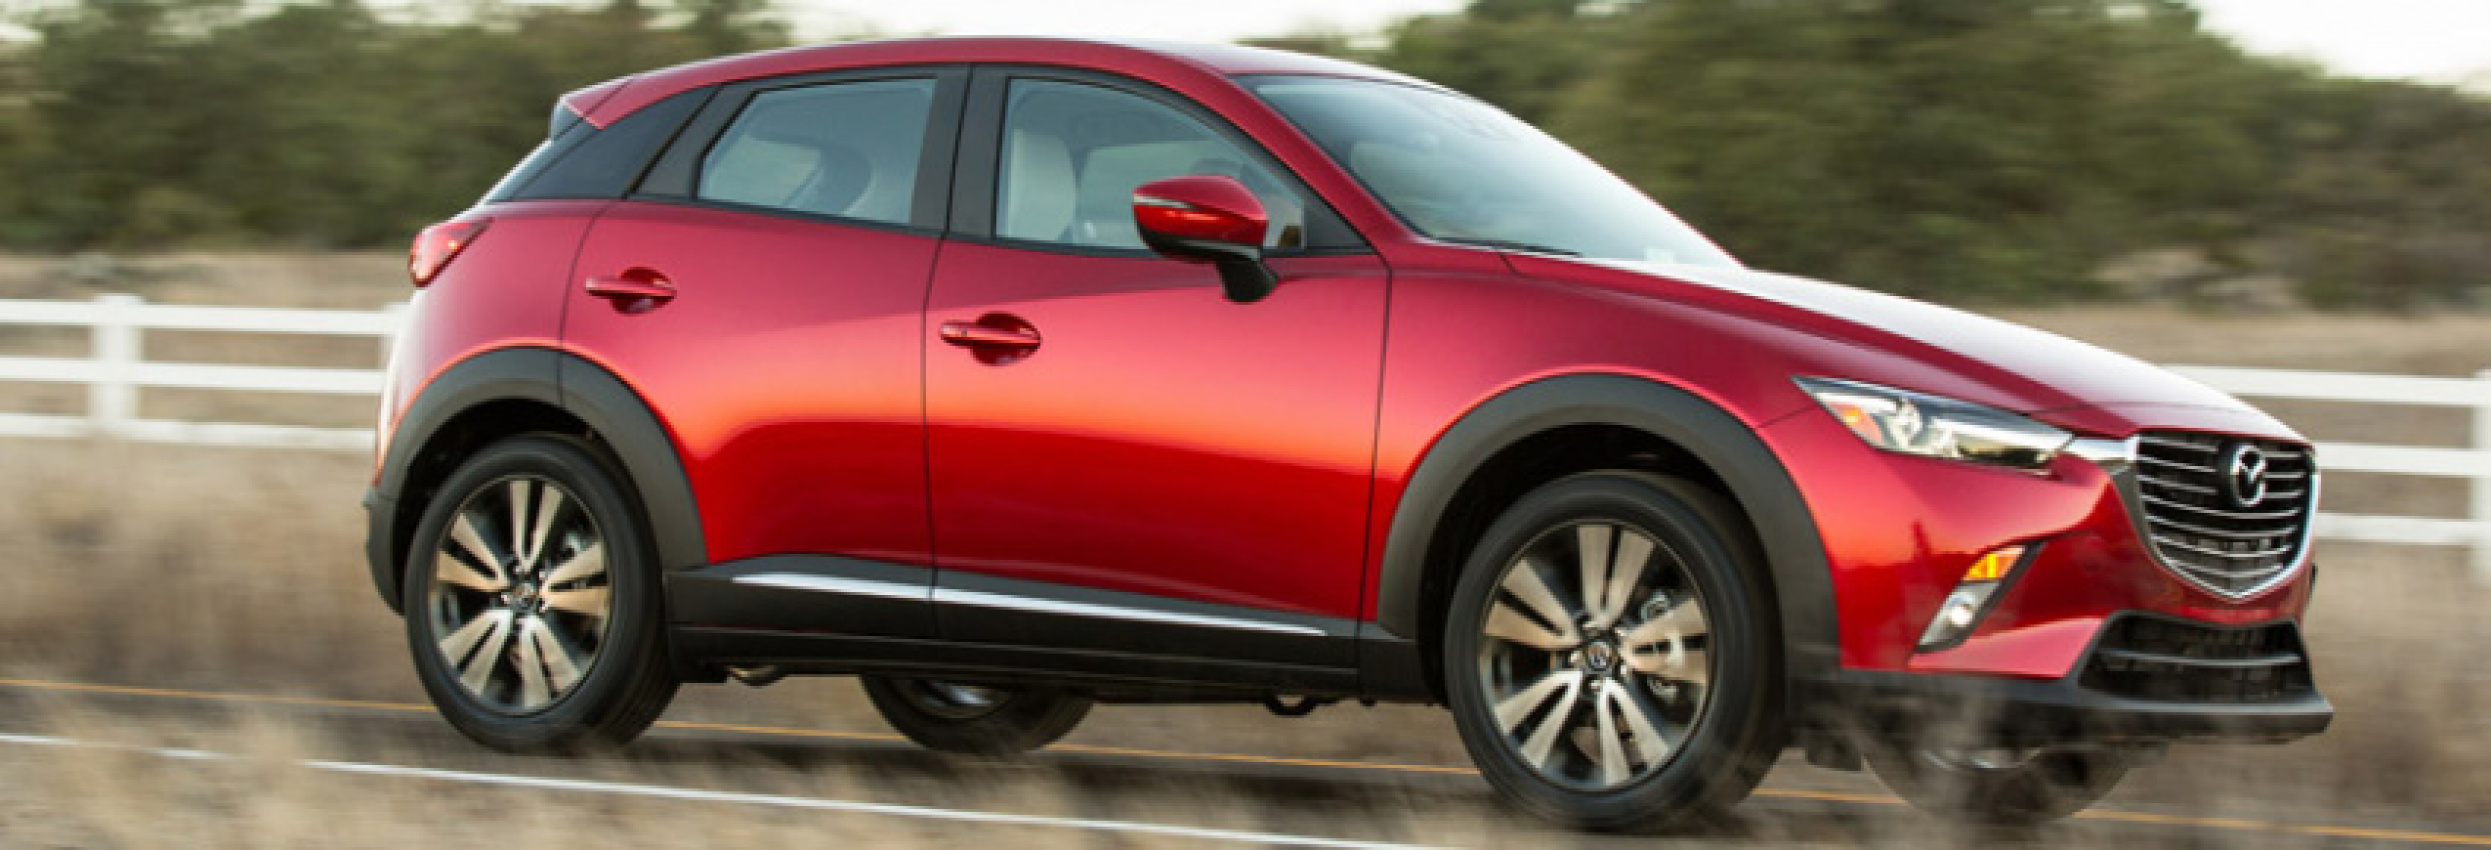 autos, cars, mazda, mazda cx-3, 2016 mazda cx-3 is rated as one of the most economic crossovers for 2015 and 2016